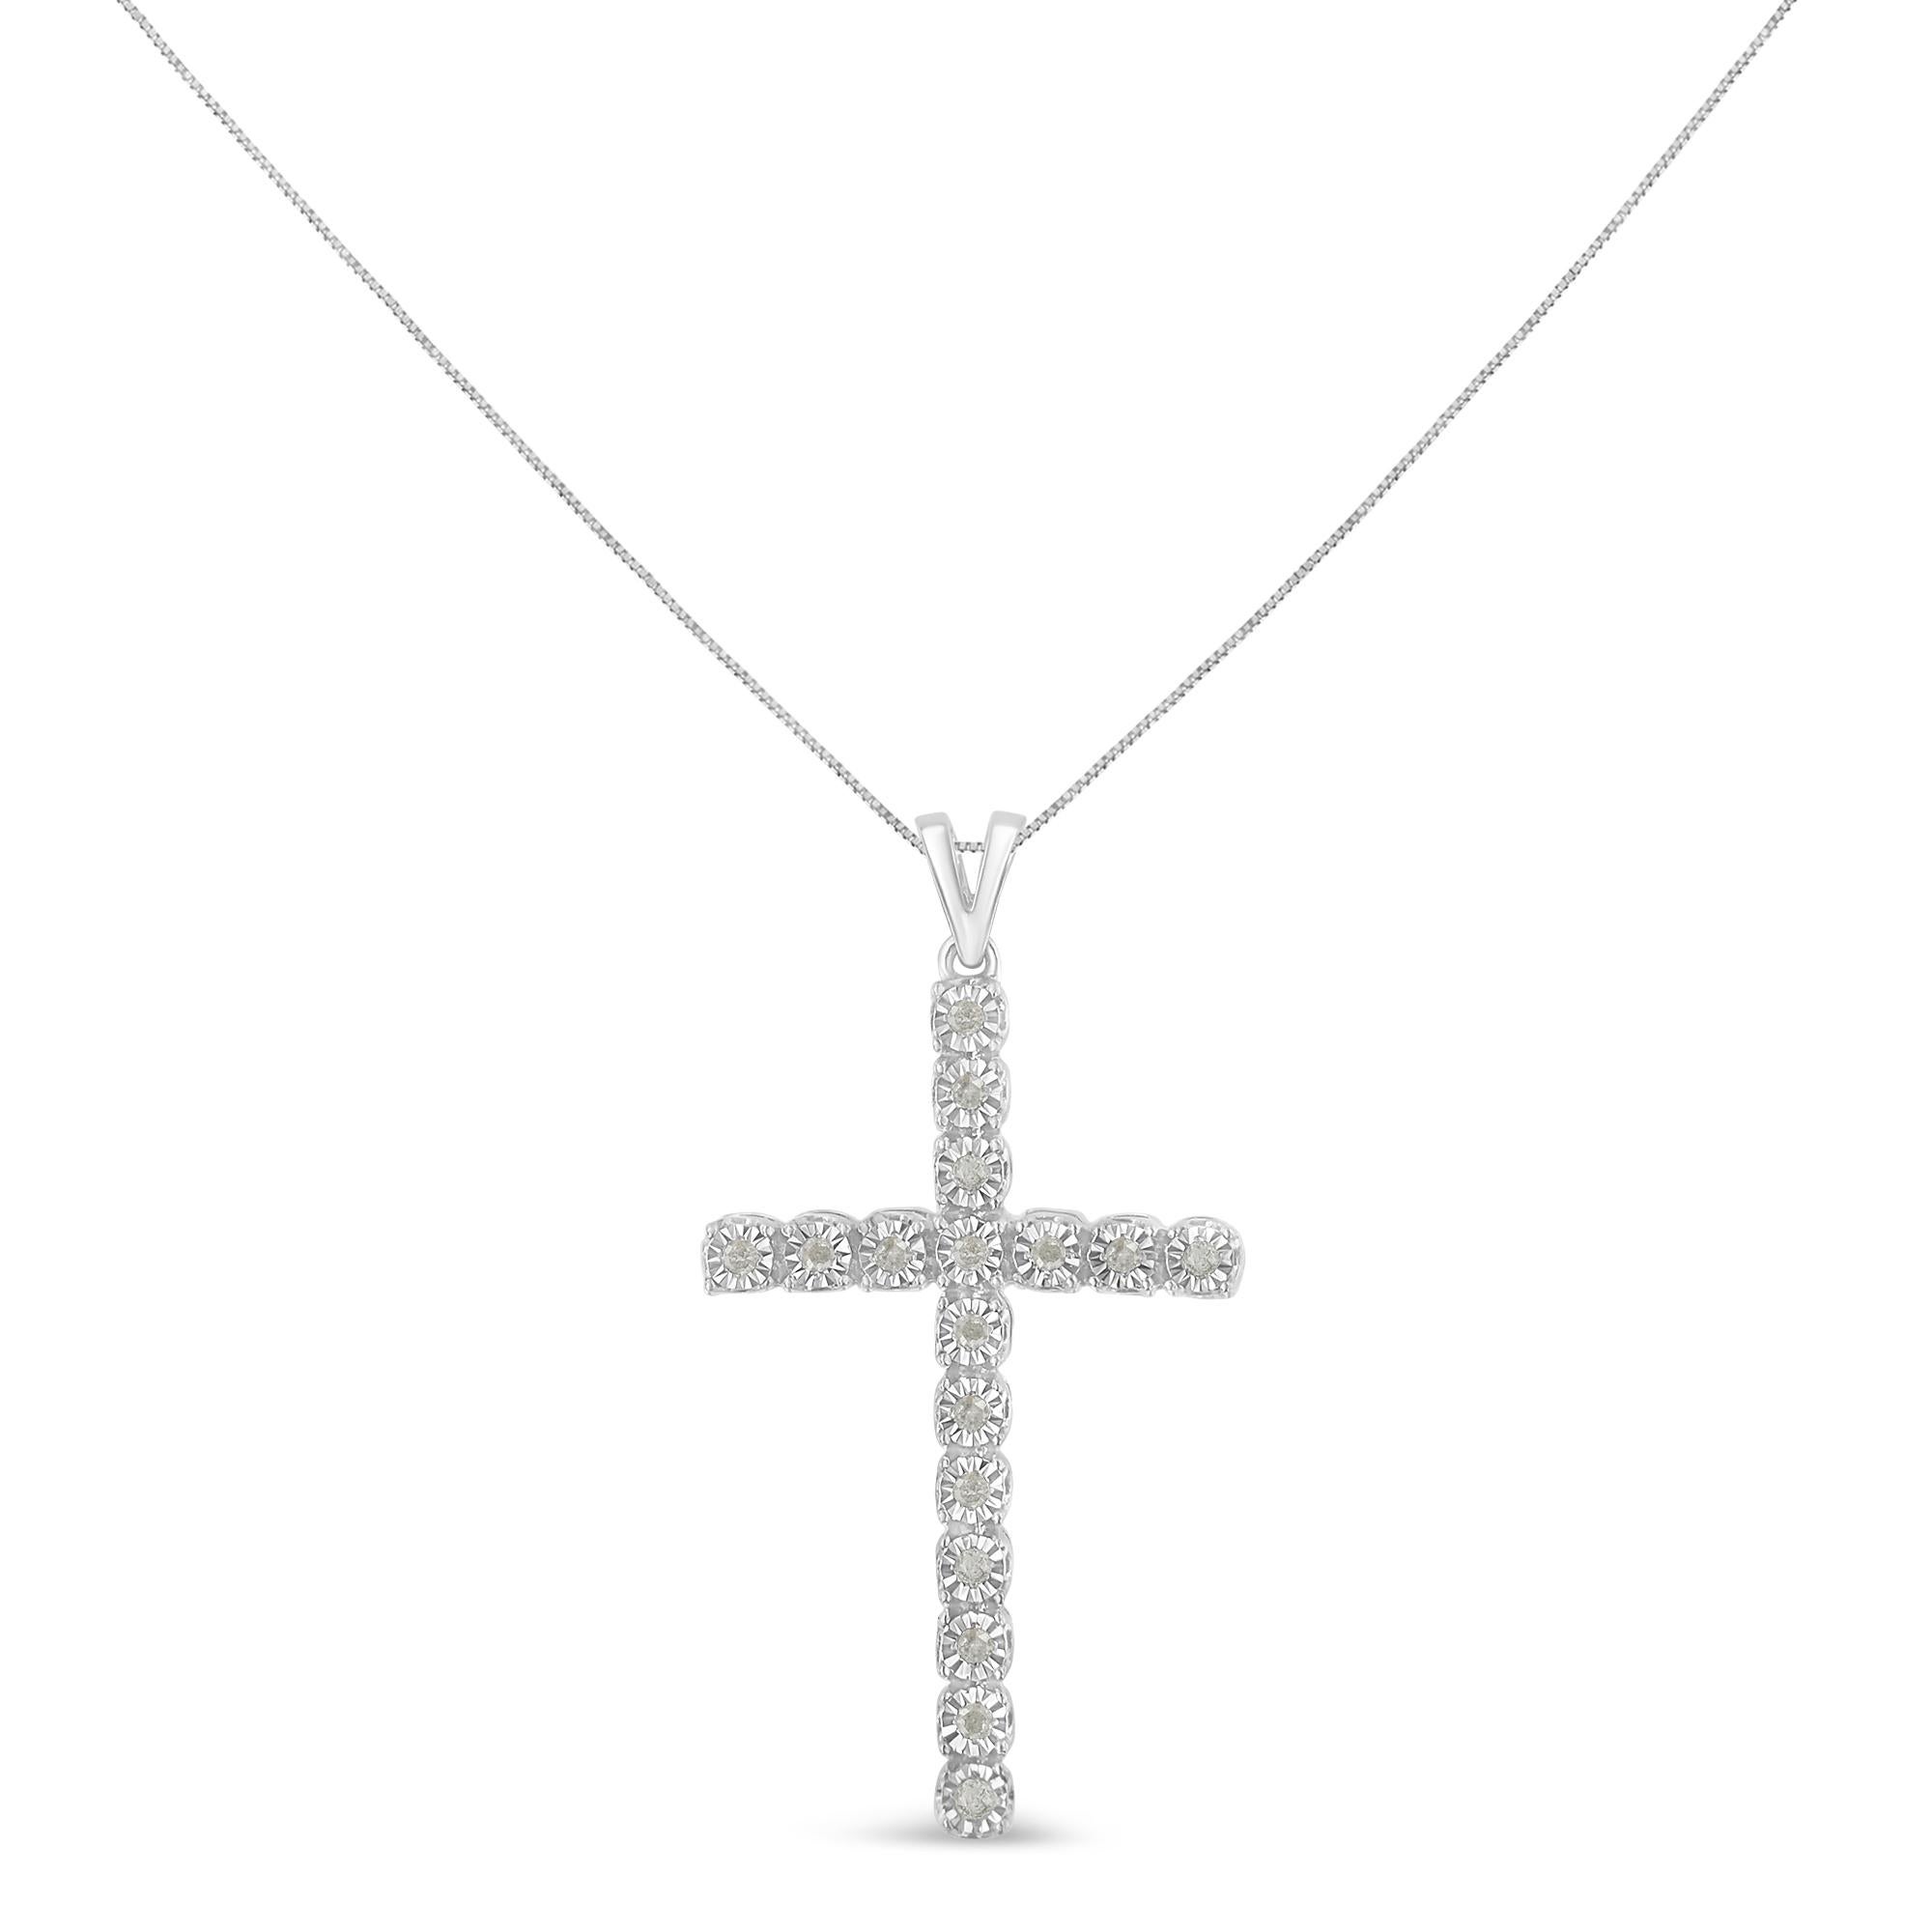 This beautiful piece of jewelry is not only a symbol of devotion and faith but also a true work of art. This gorgeous cross pendant features miracle set promo quality diamonds. The unique miracle-plate setting, which centers each genuine diamond in